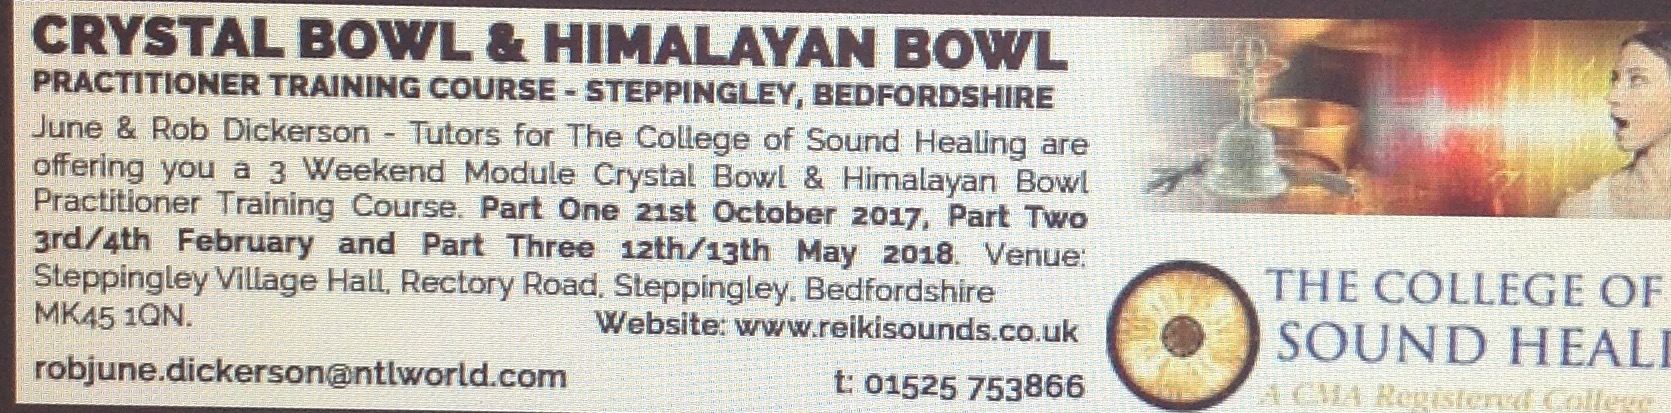 BEDFORDSHIRE - Crystal Bowl & Himalayan Bowl Practitioner Training Course Module